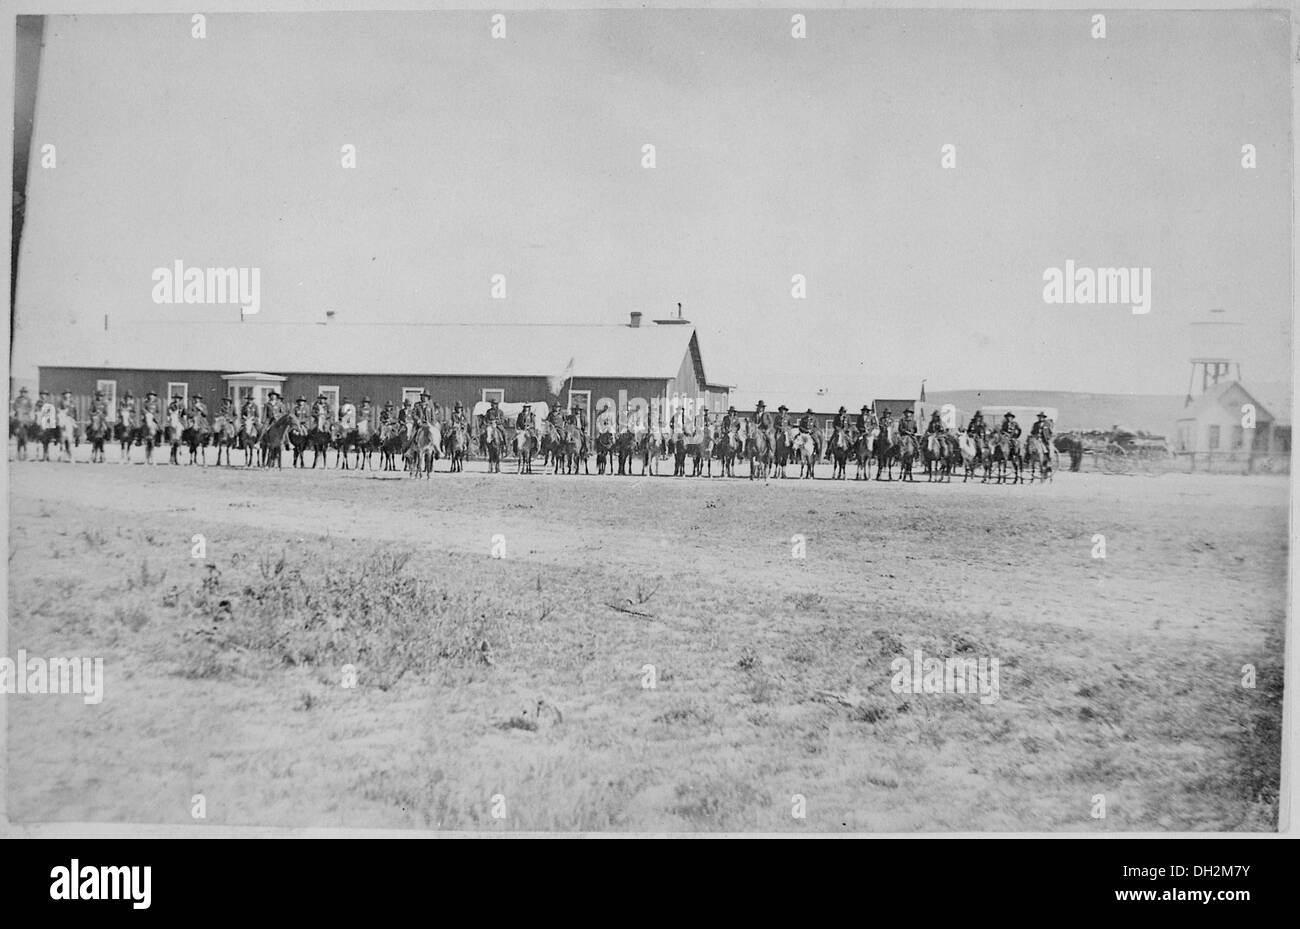 Sioux Indian police lined up on horseback in front of Pine Ridge Agency buildings, Dakota Territory, 08-09-1882 519143 Stock Photo